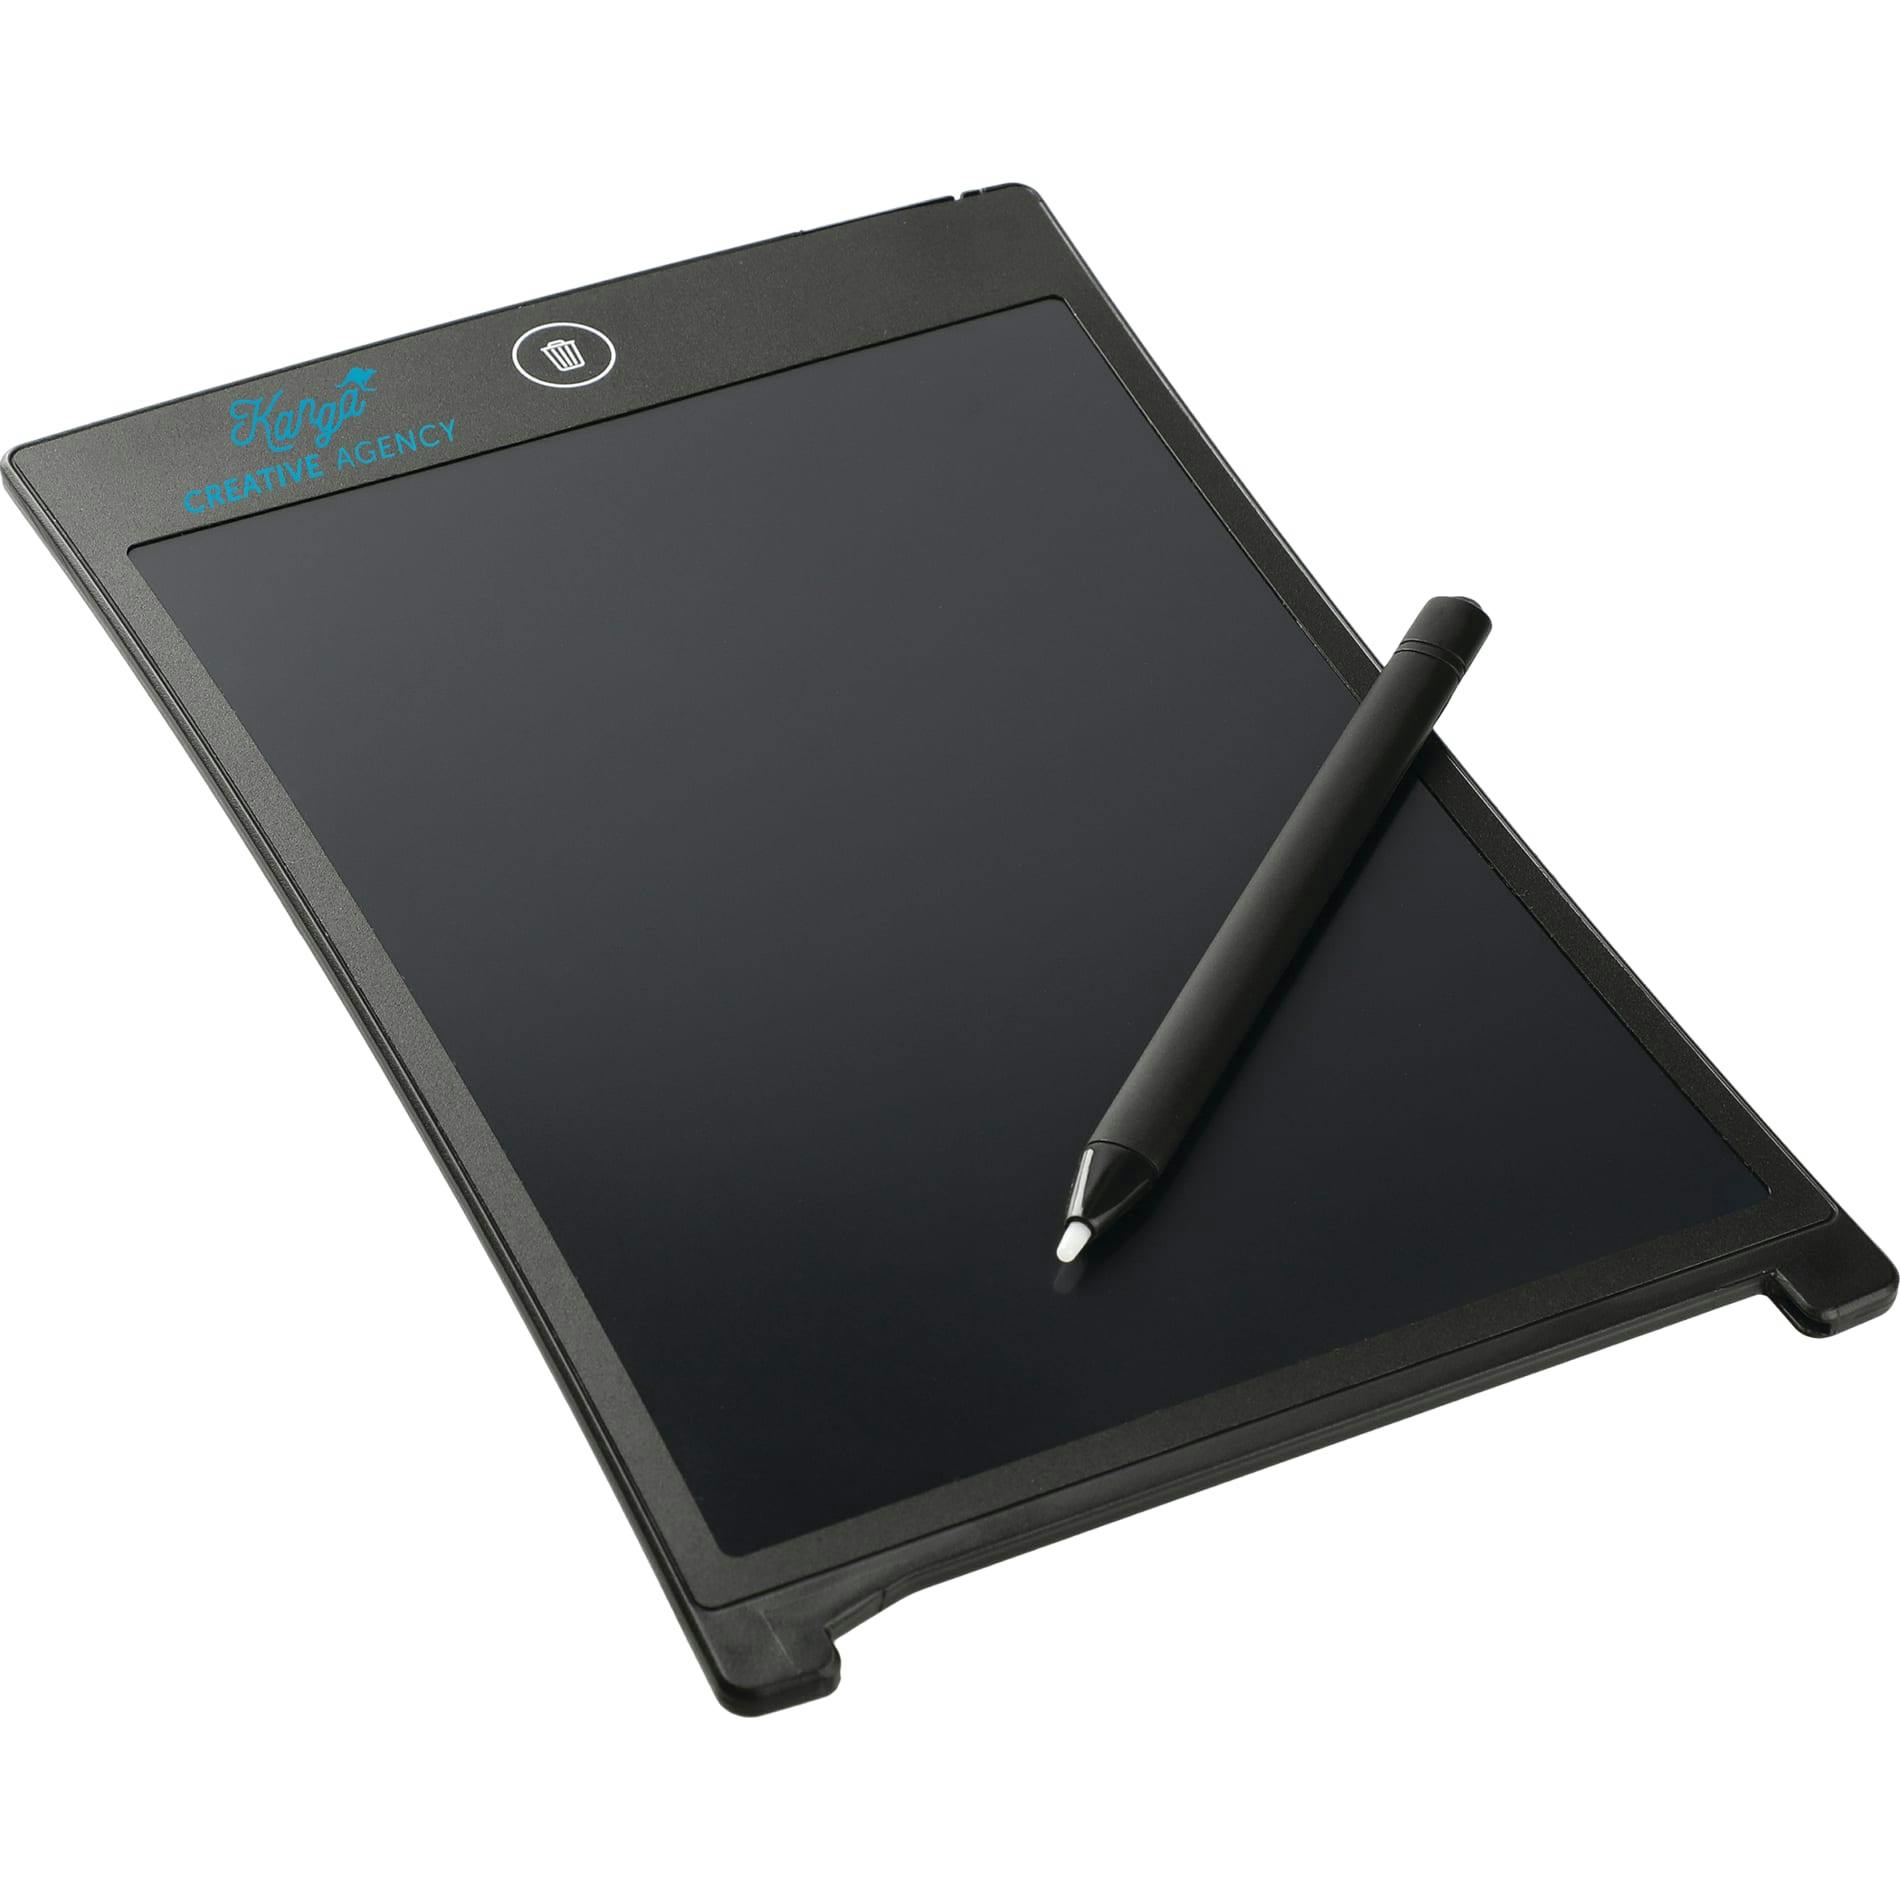 8.5" LCD e-Writing & Drawing Tablet - additional Image 4